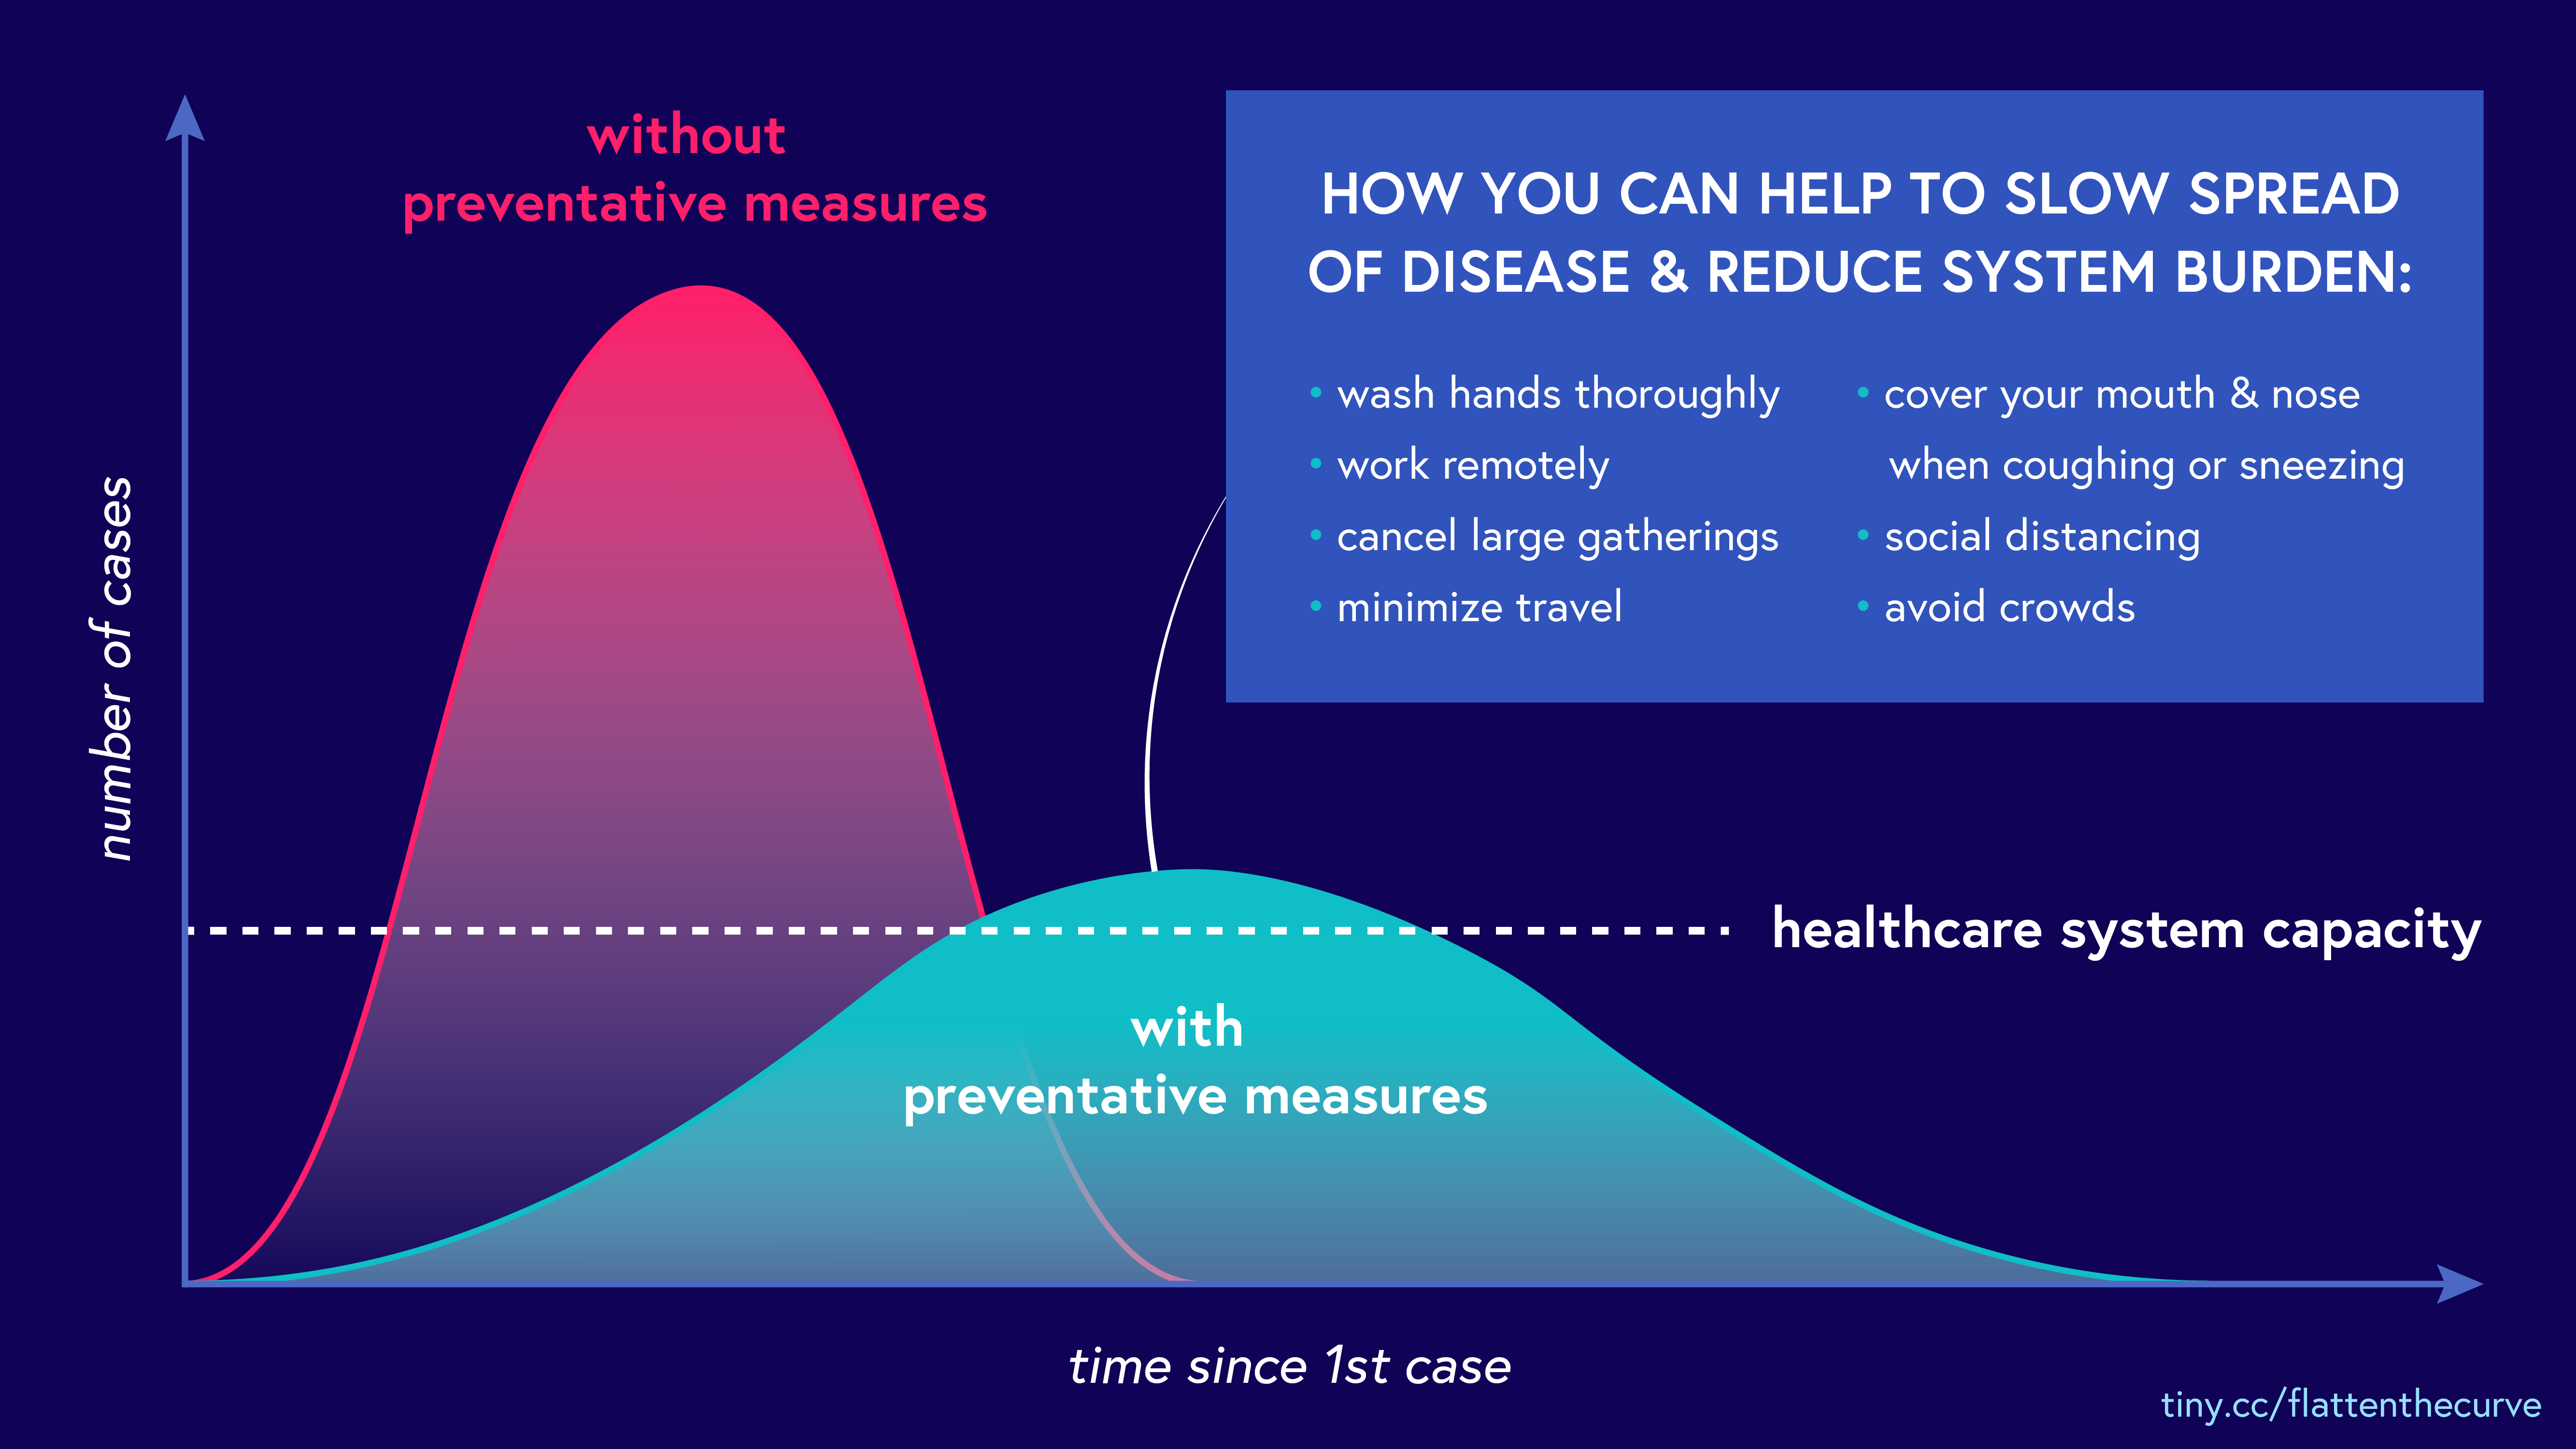 These two curves show the prevalence of infection. The taller and steeper one
          represents a scenario in which preventative measures are not taken. The 
          shorter and flatter one represents a scenario where preventative measure 
          are taken. The latter scenario will overwhelm healthcare capacity less.